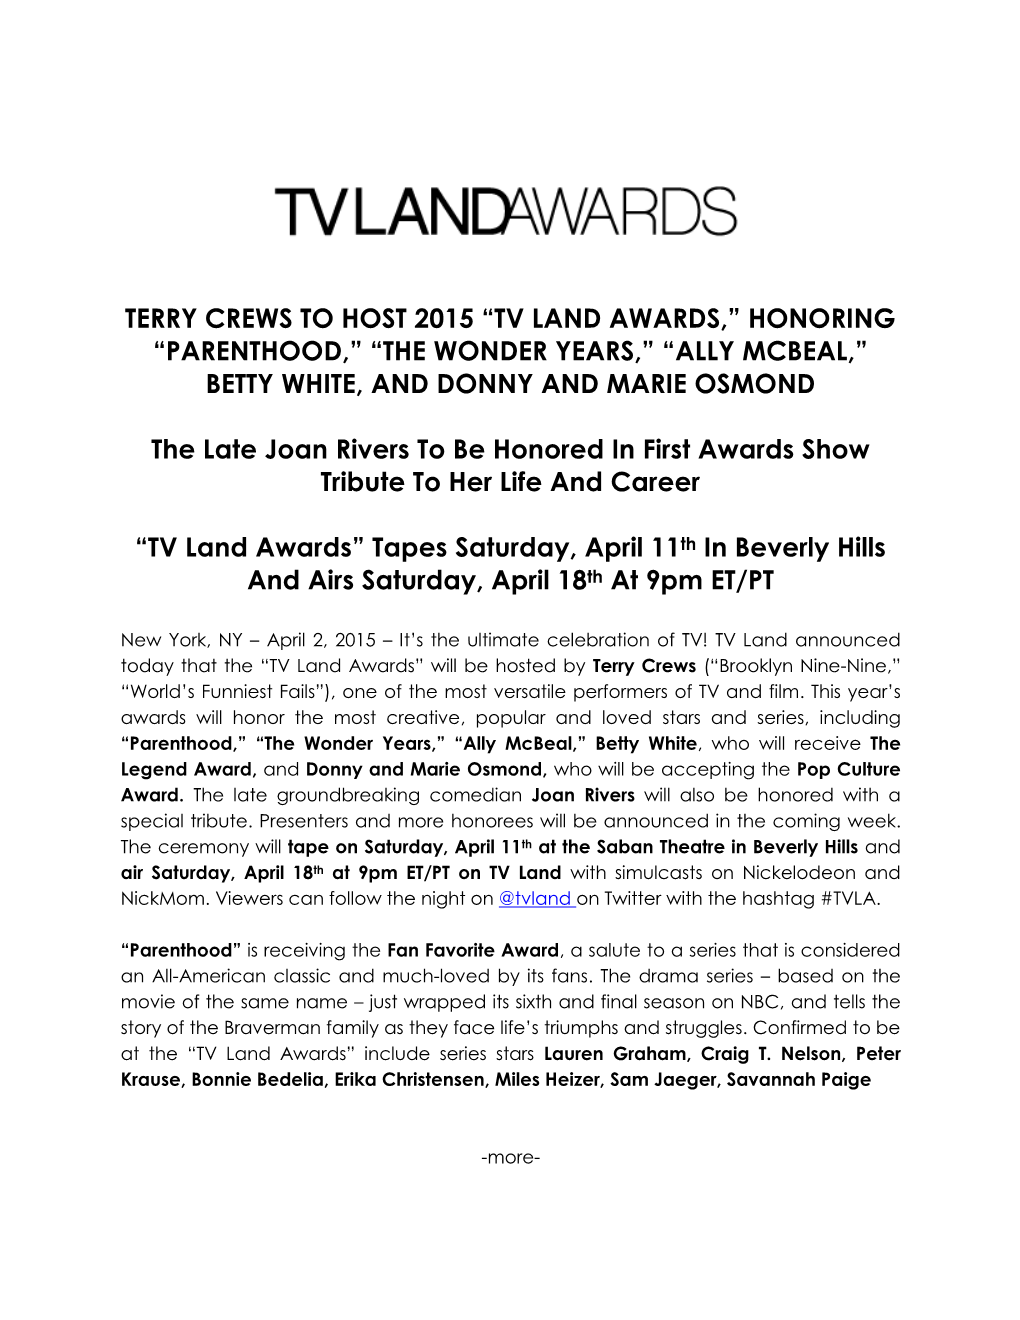 Tv Land Awards,” Honoring “Parenthood,” “The Wonder Years,” “Ally Mcbeal,” Betty White, and Donny and Marie Osmond